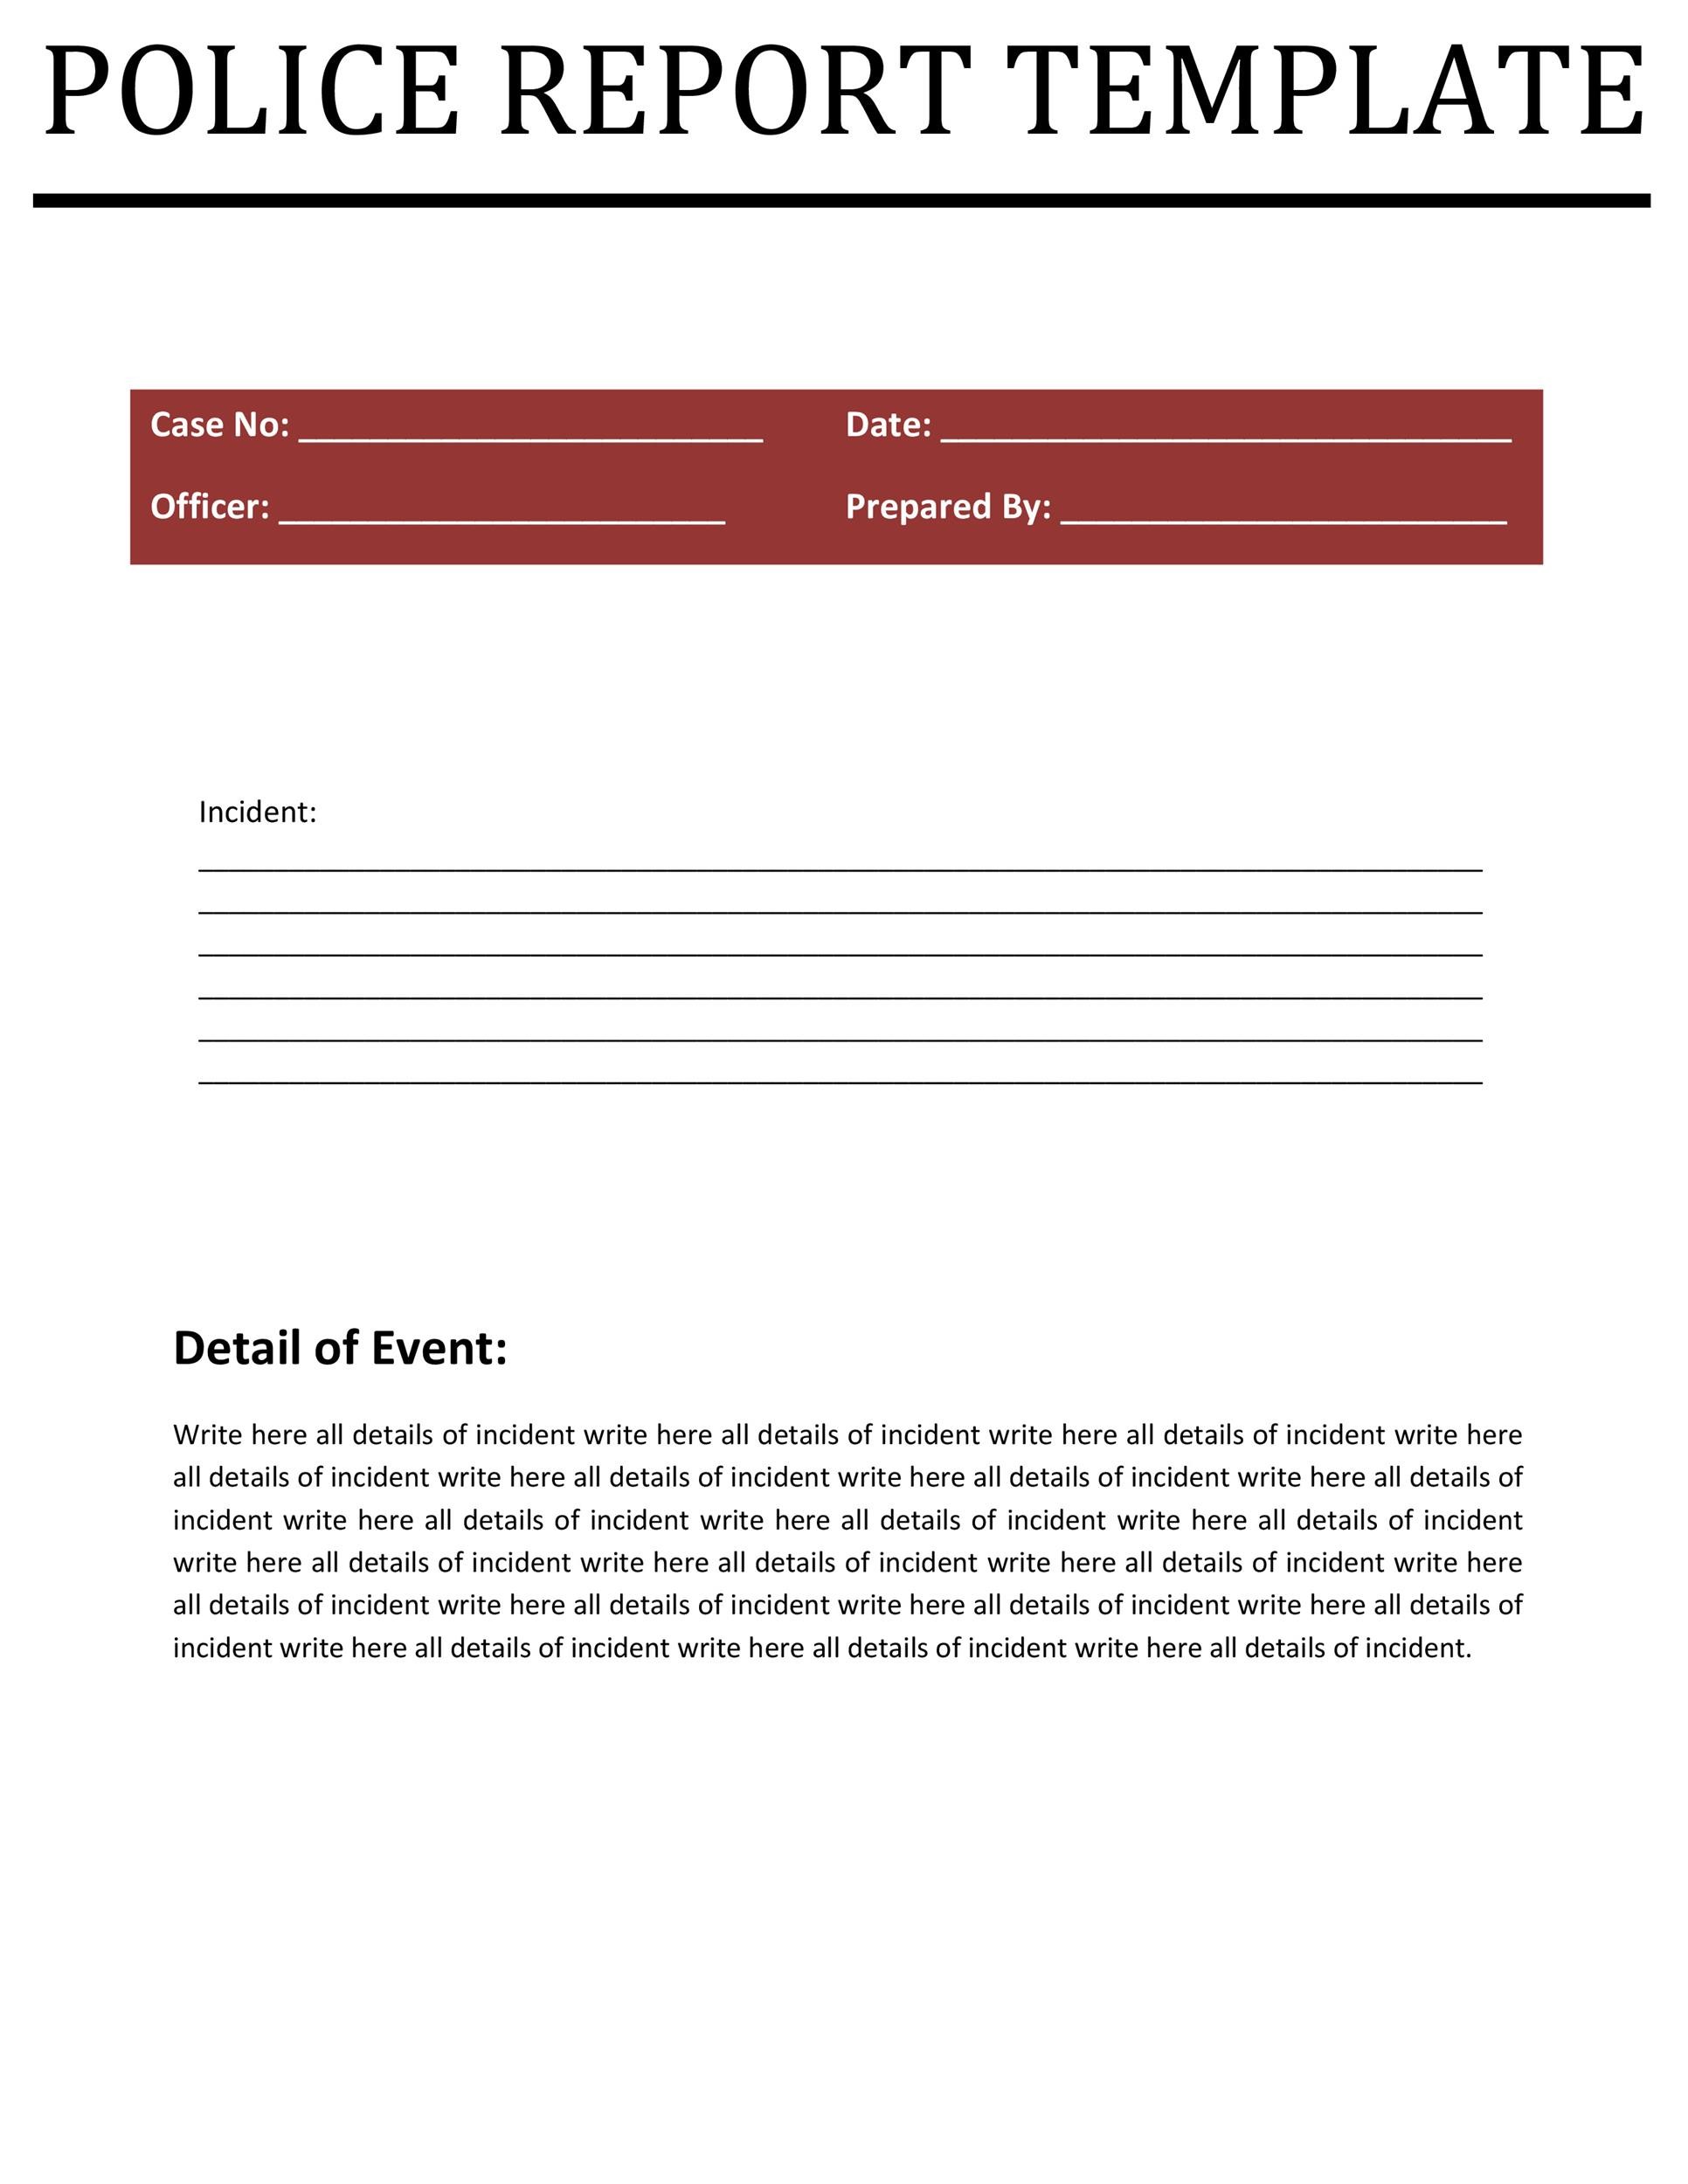 Free police report template 04